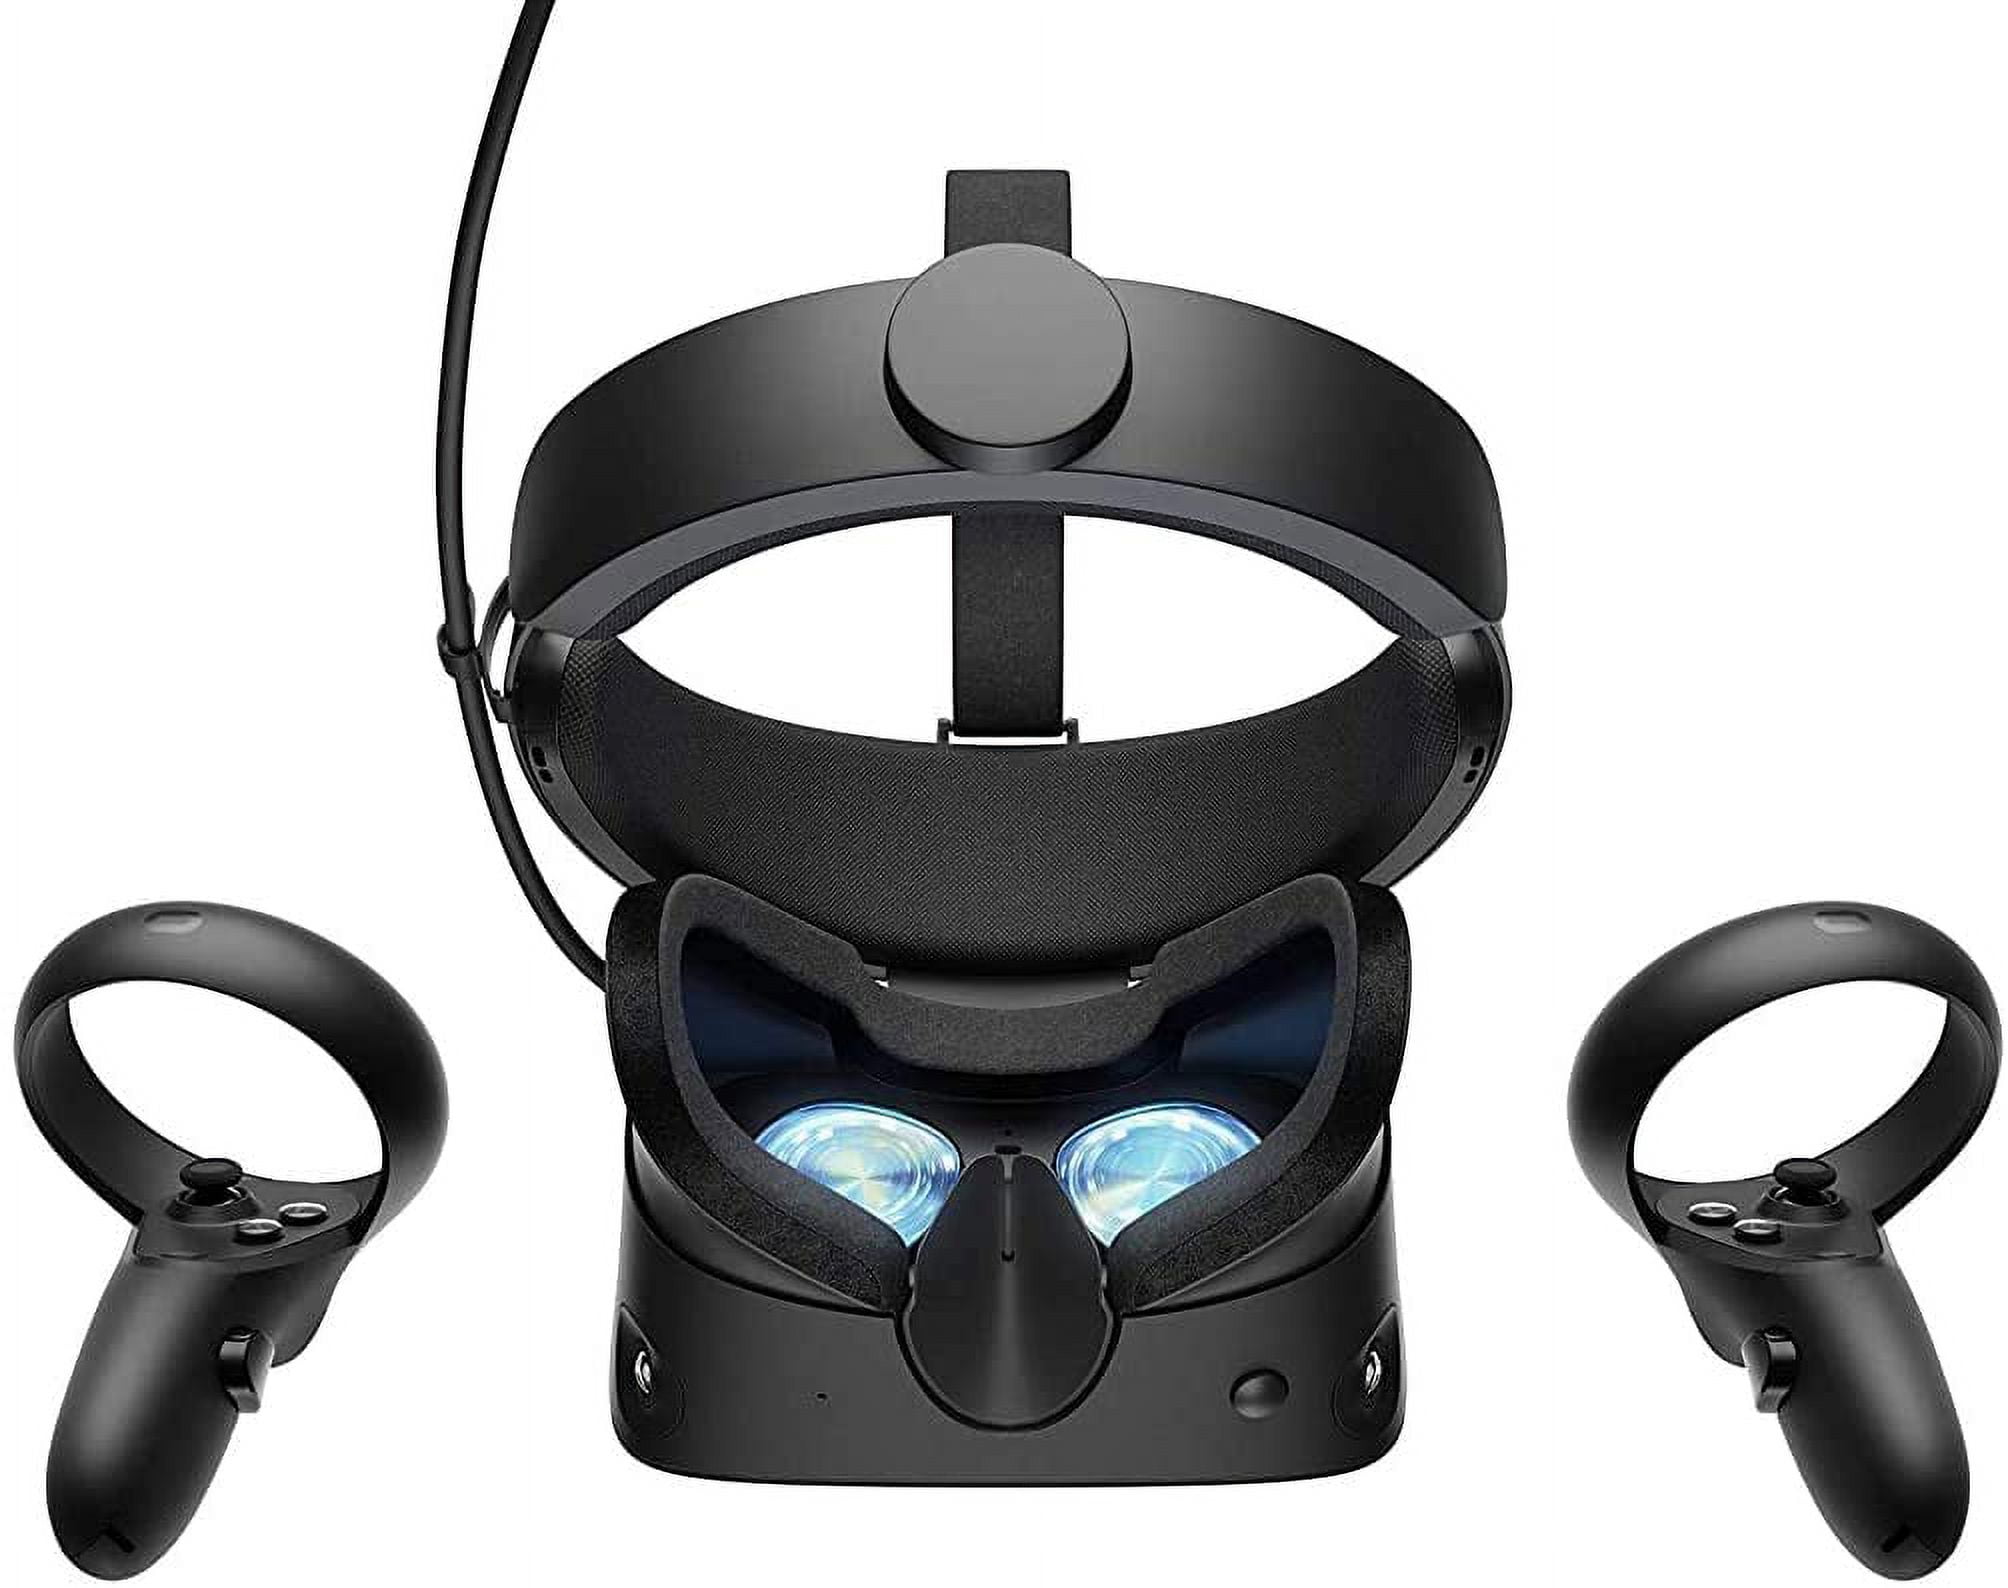 Better for PC VR? Oculus Quest 2 vs Rift S (plus Air Link wireless PC VR  tutorial updated January 3, 2022)